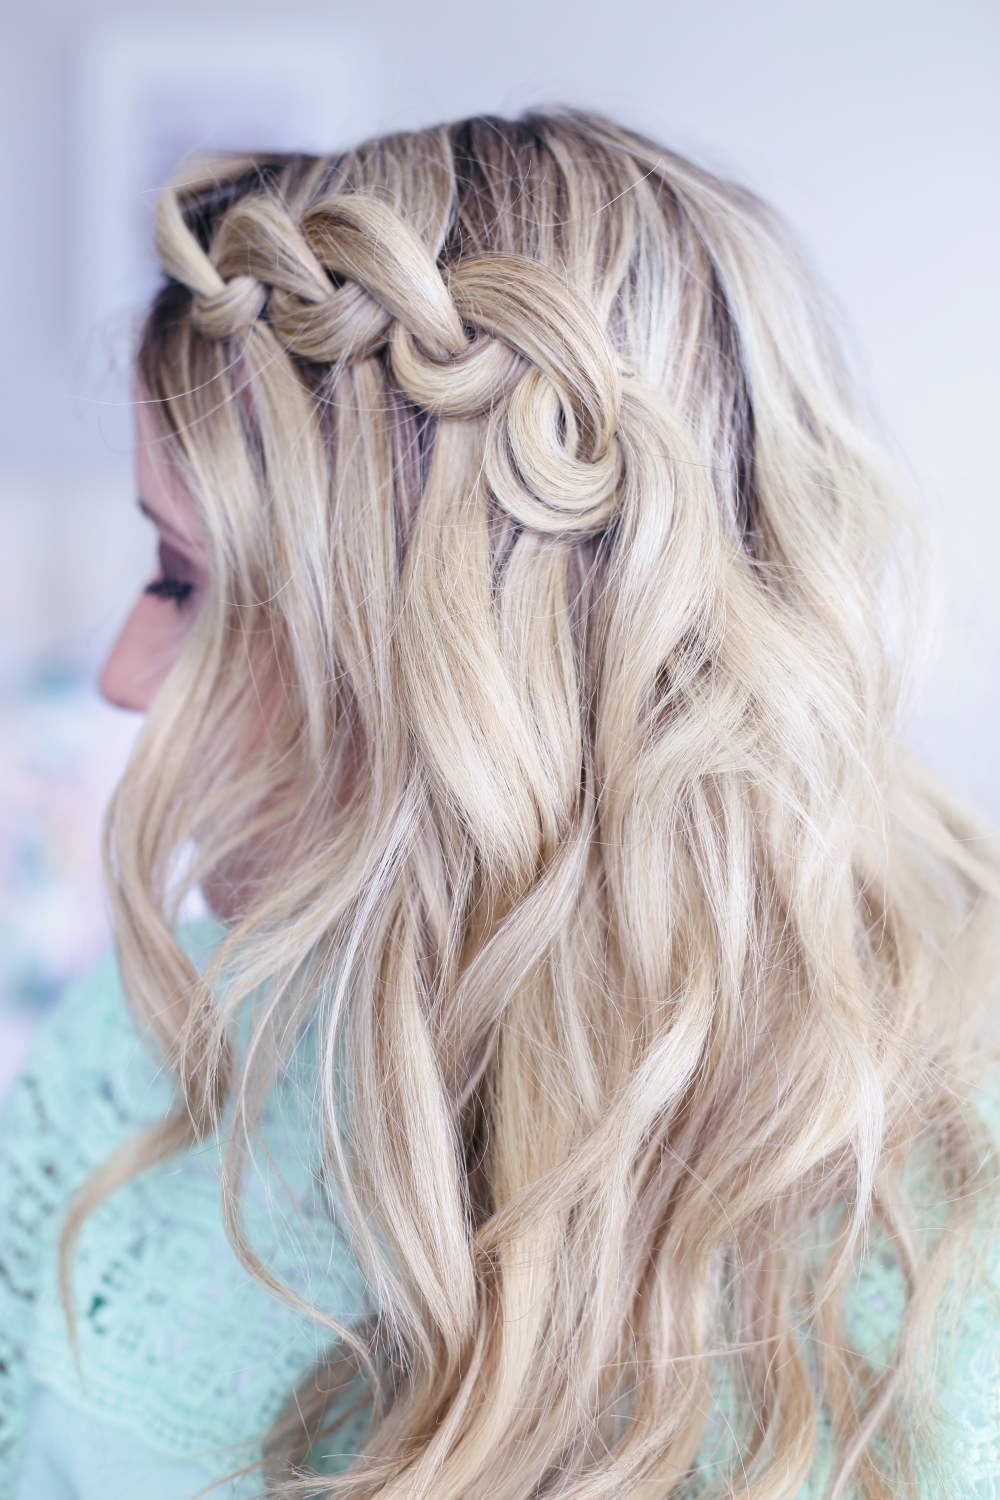 Image of Waterfall Braid Victorian hairstyle